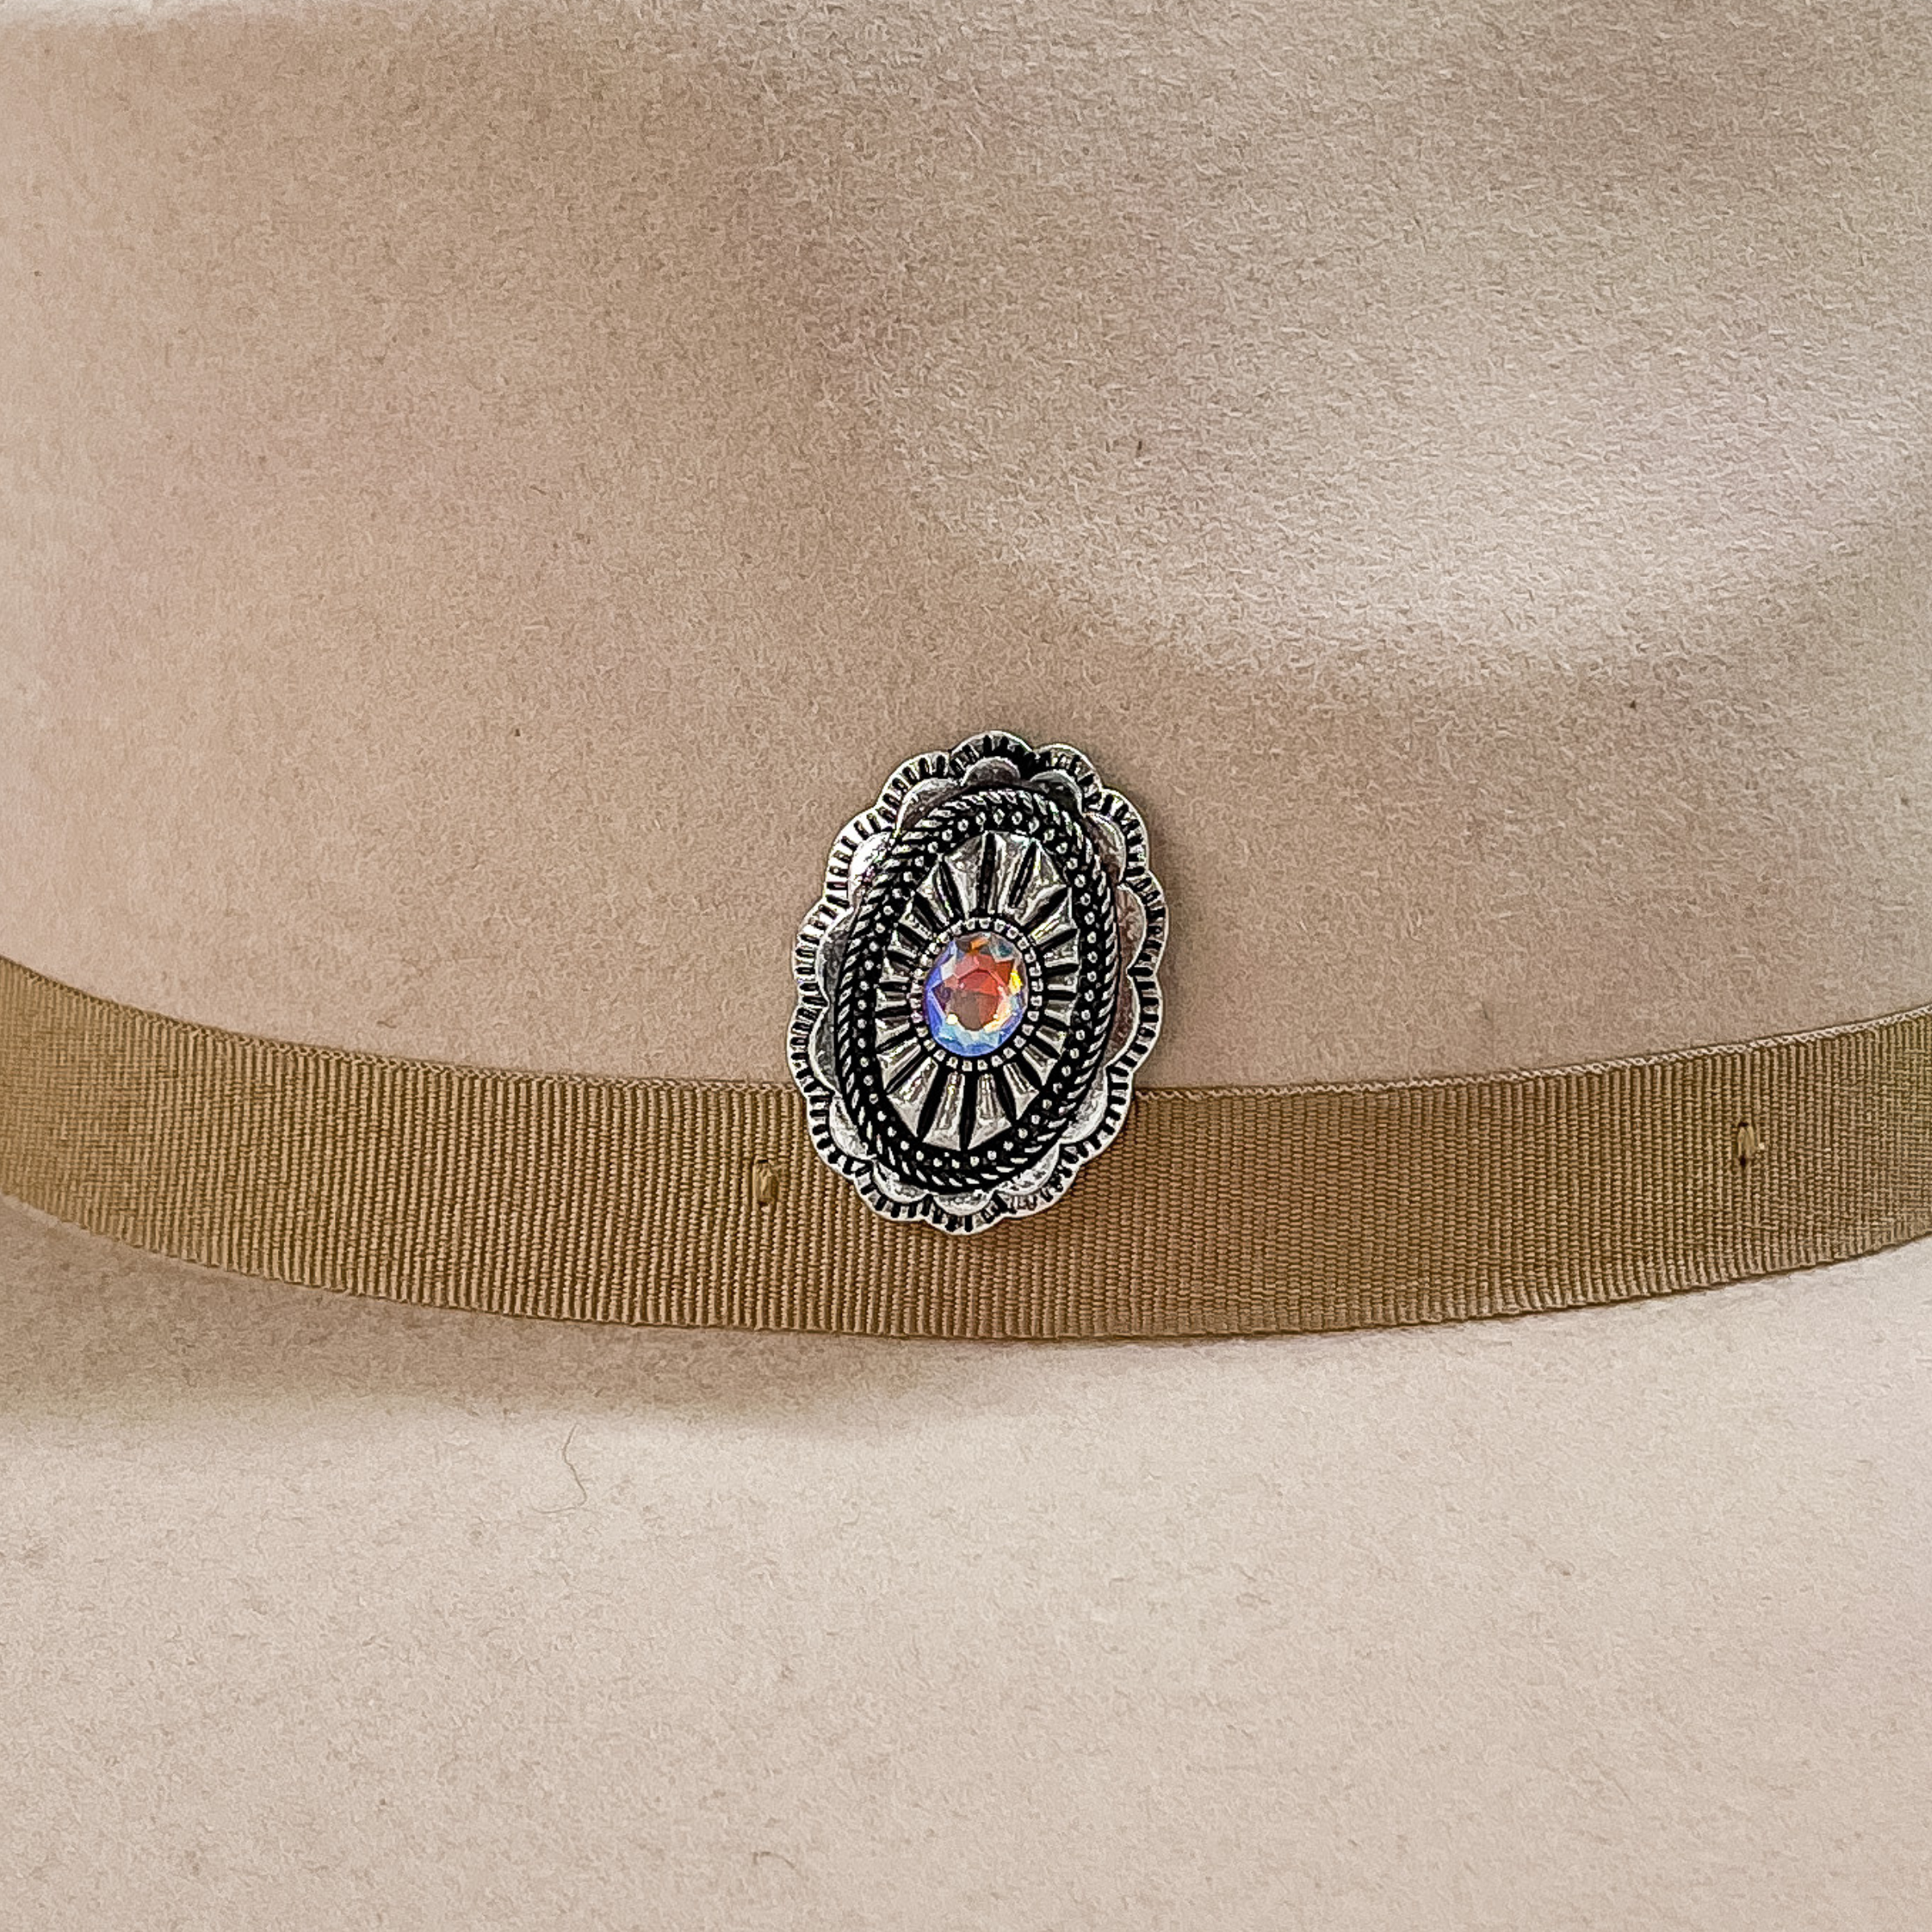 Silver, oval concho with detailed engraving and a center AB crystal hat pin. This hat pin is pictured on a beige hat. 